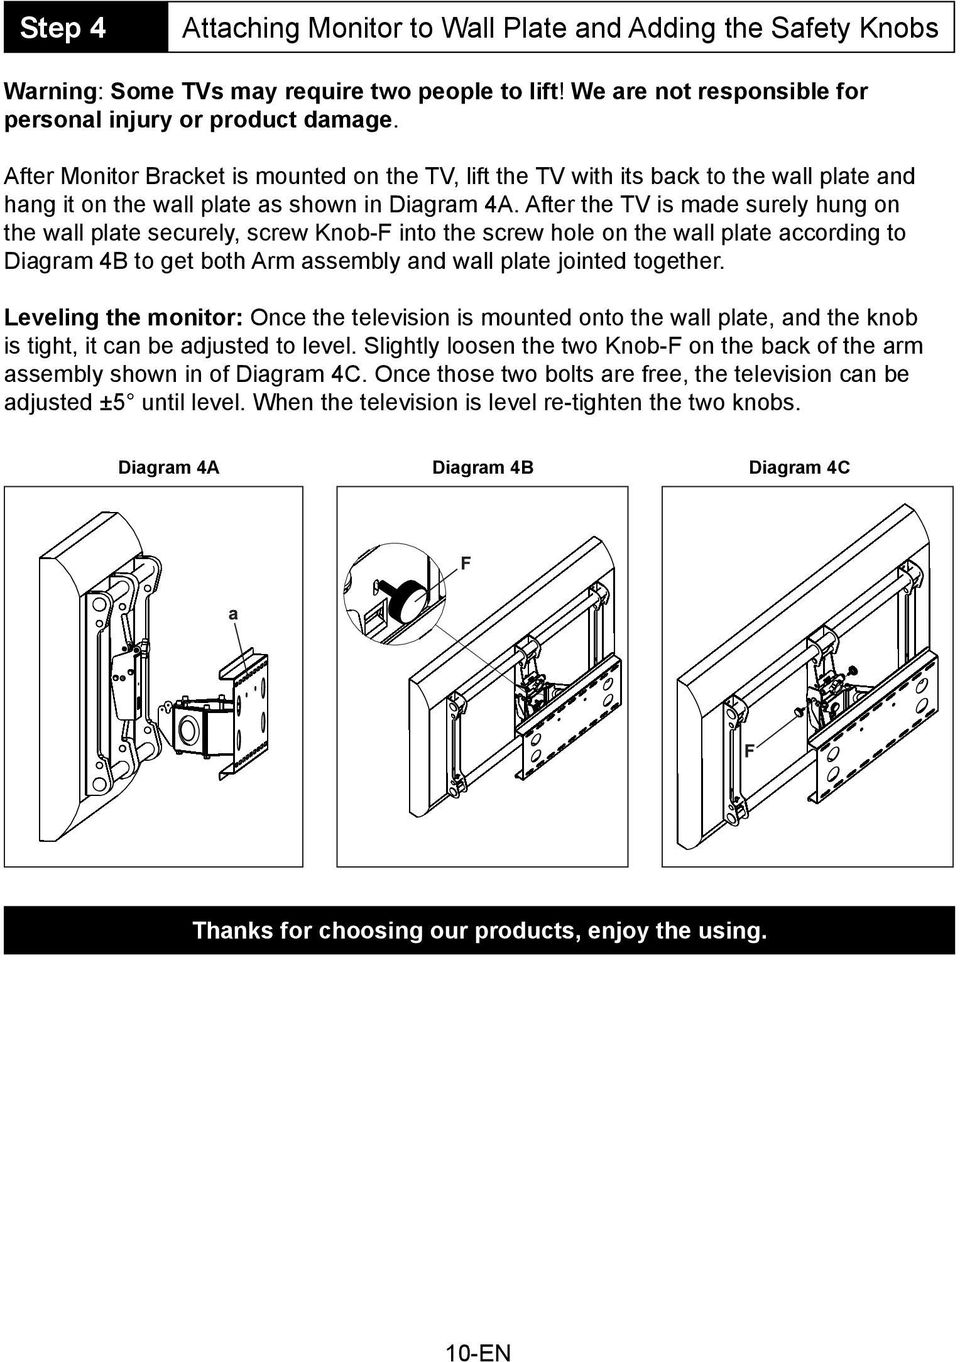 After the TV is made surely hung on the wall plate securely, screw Knob-F into the screw hole on the wall plate according to Diagram 4B to get both Arm assembly and wall plate jointed together.